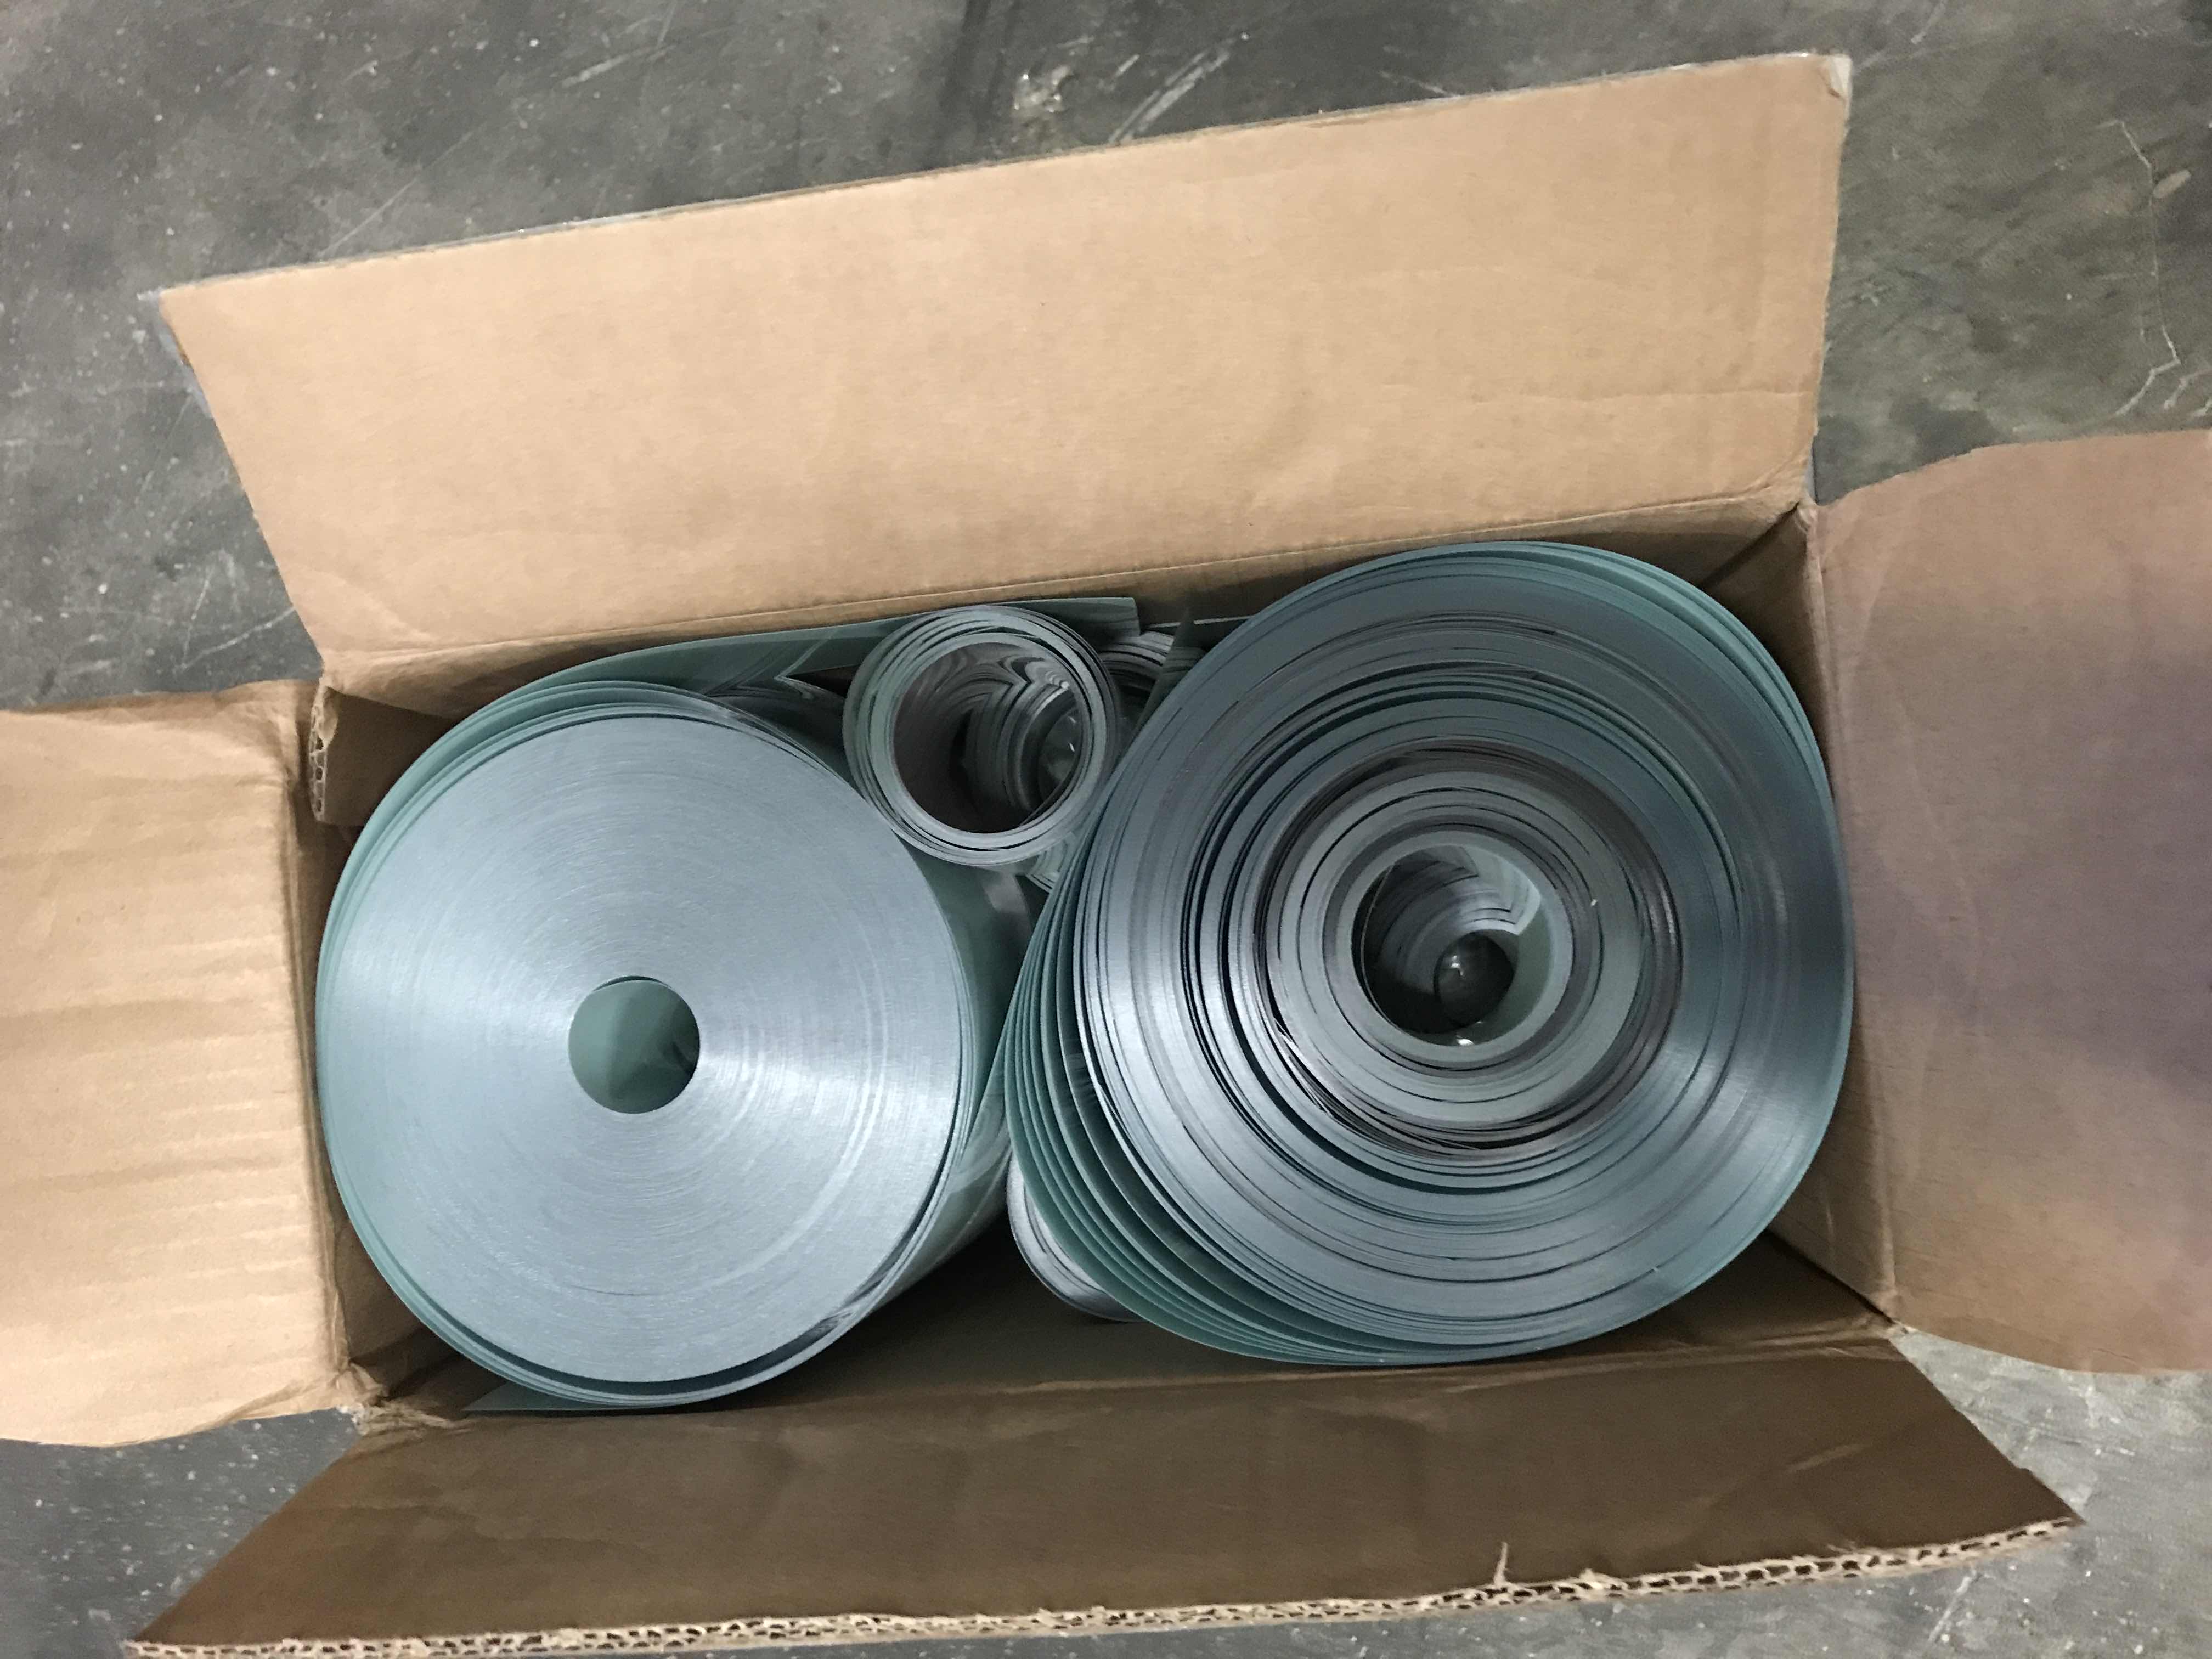 Undeveloped Industrial film rolls for recycling